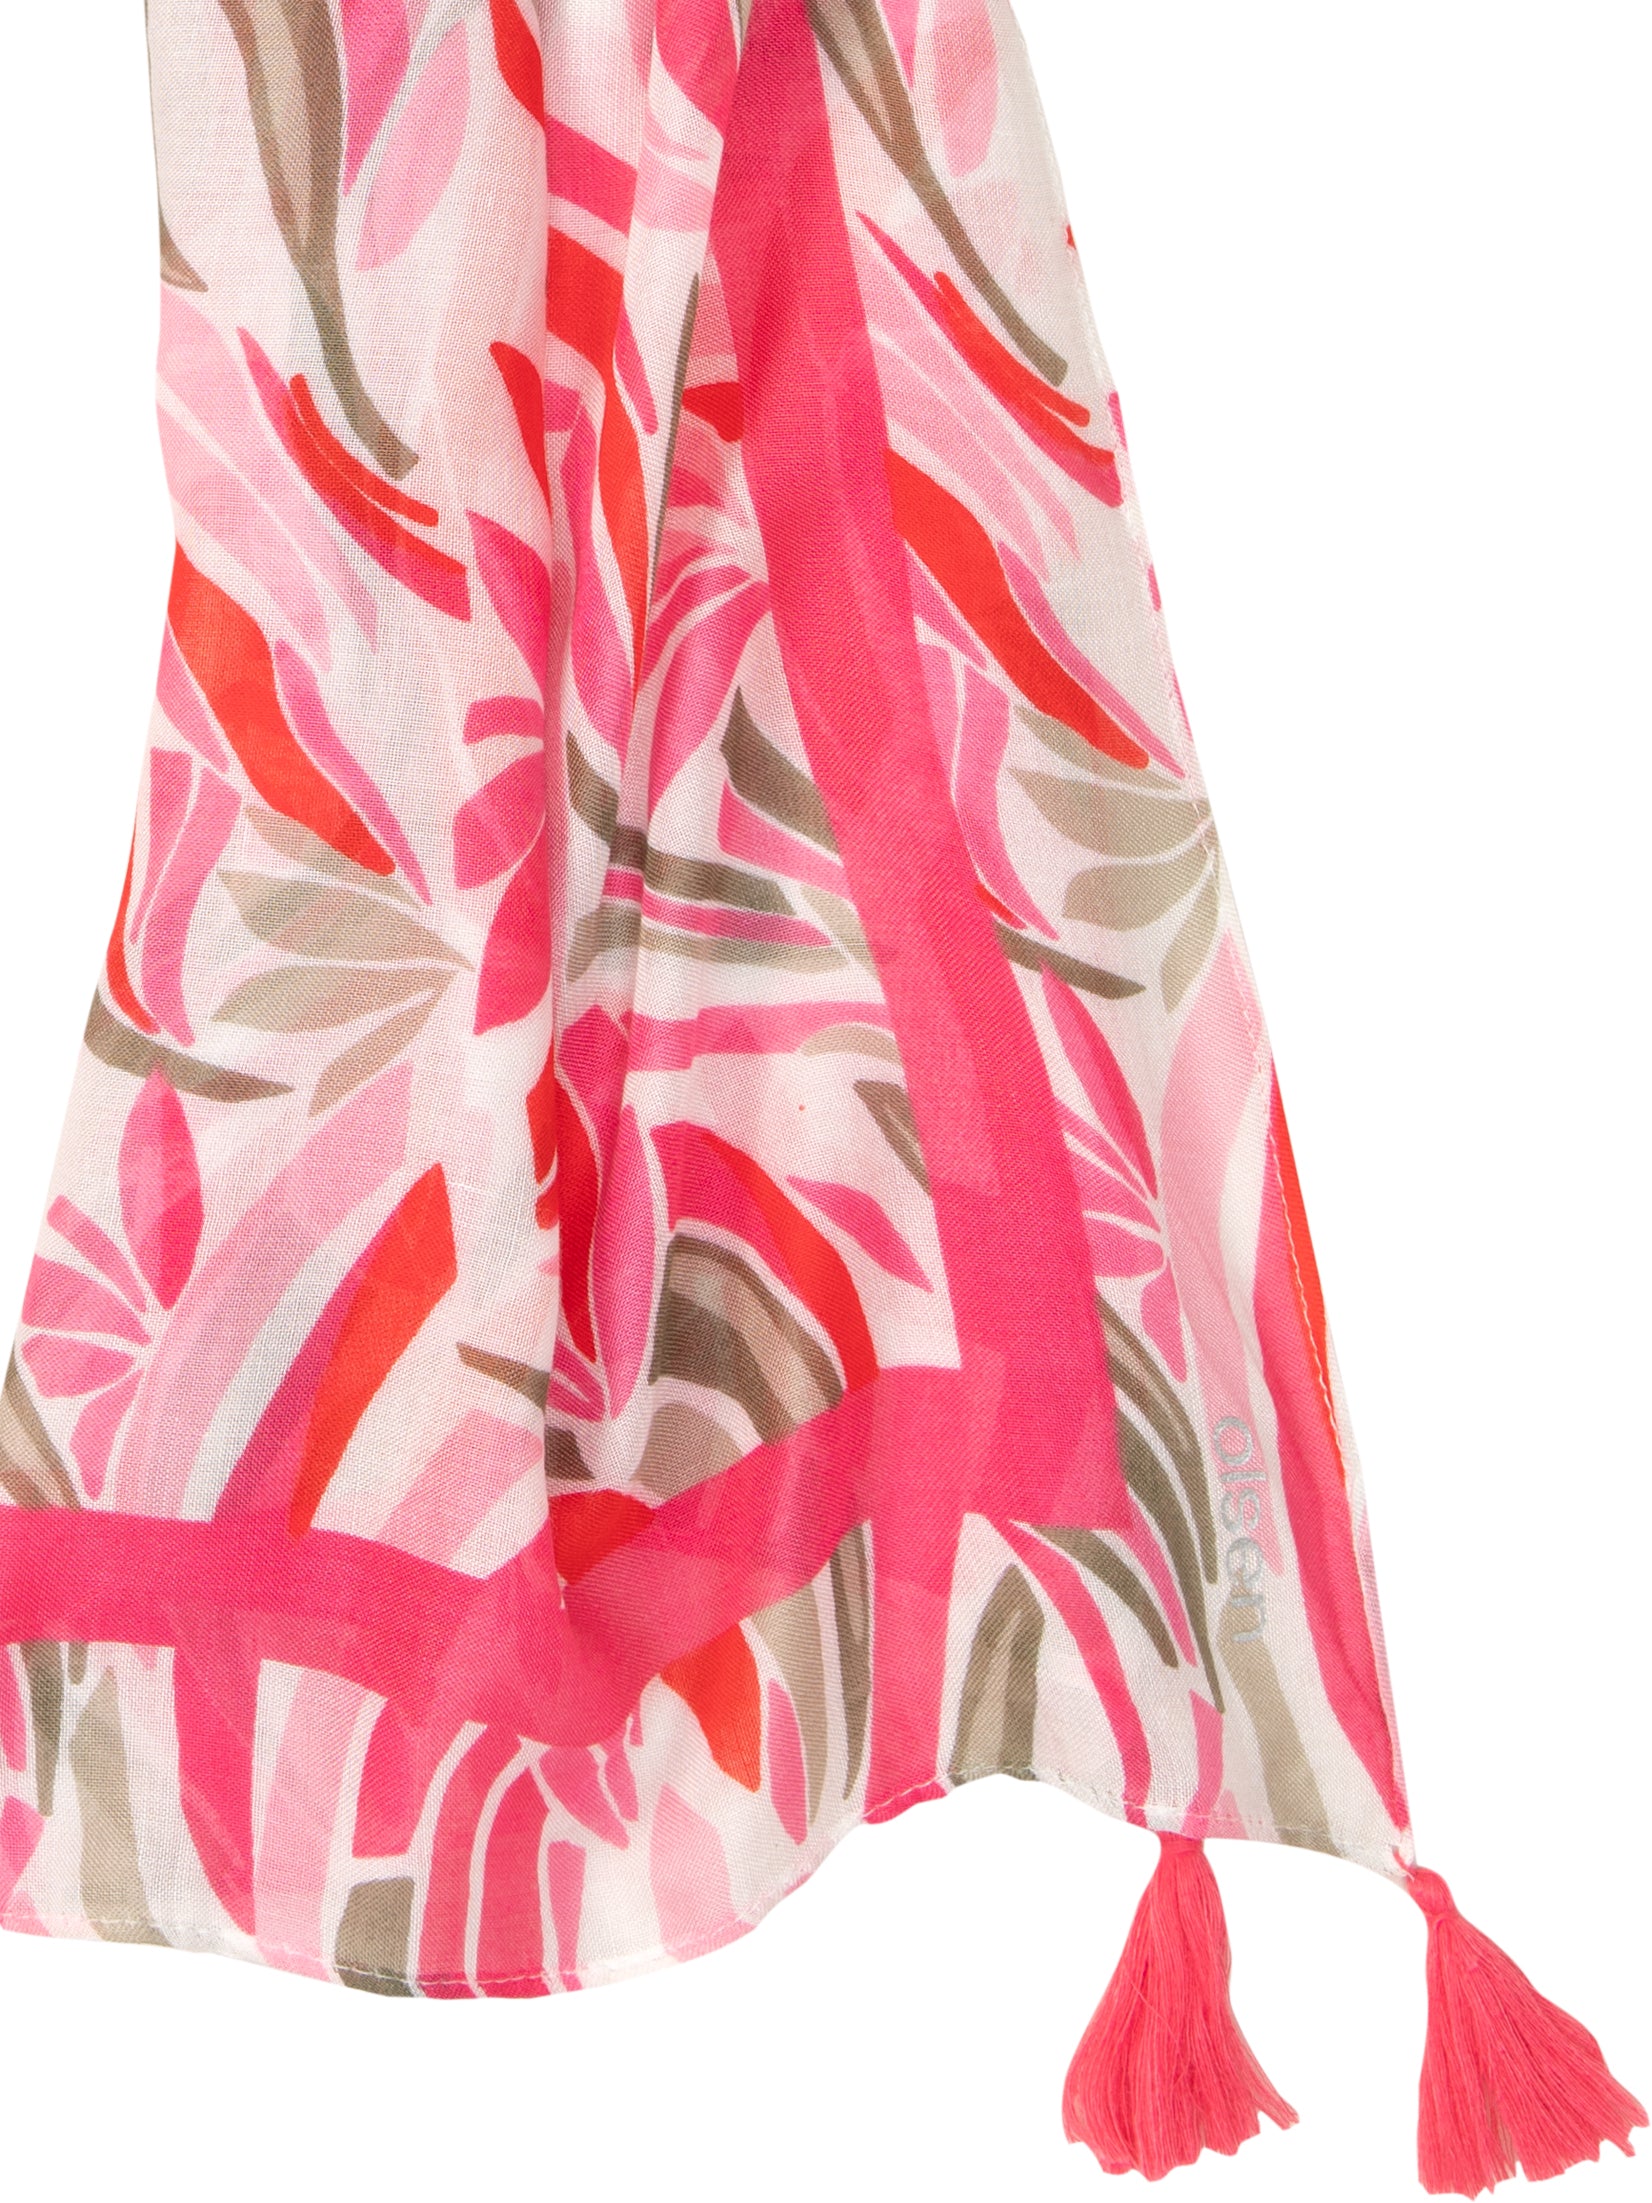 Woven Scarf in Paradise Pink